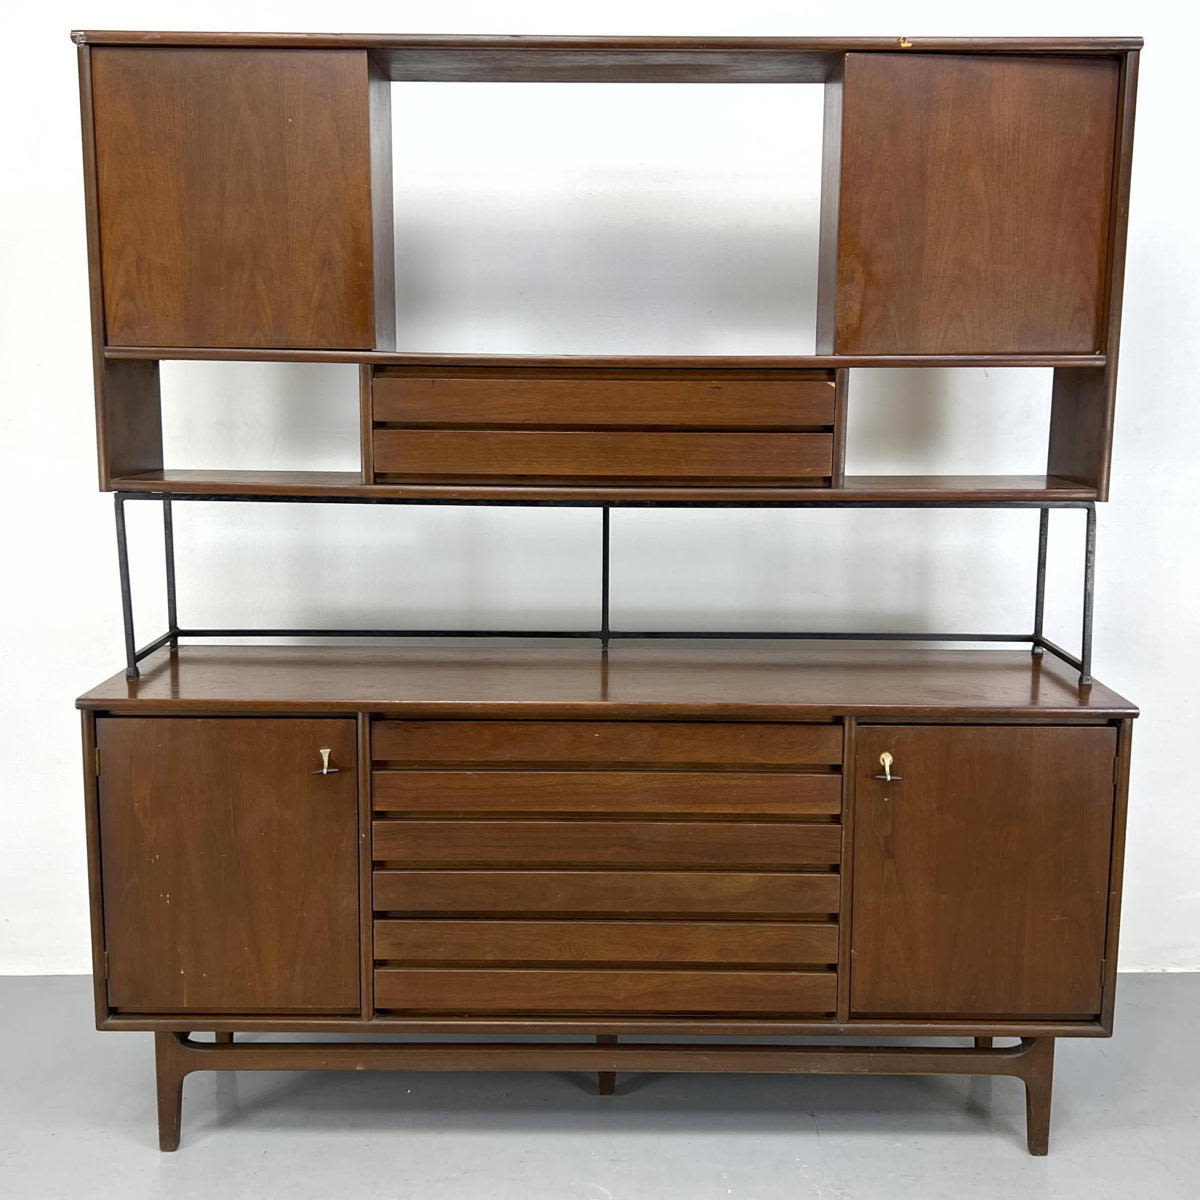 Stanley two tiered credenza. American